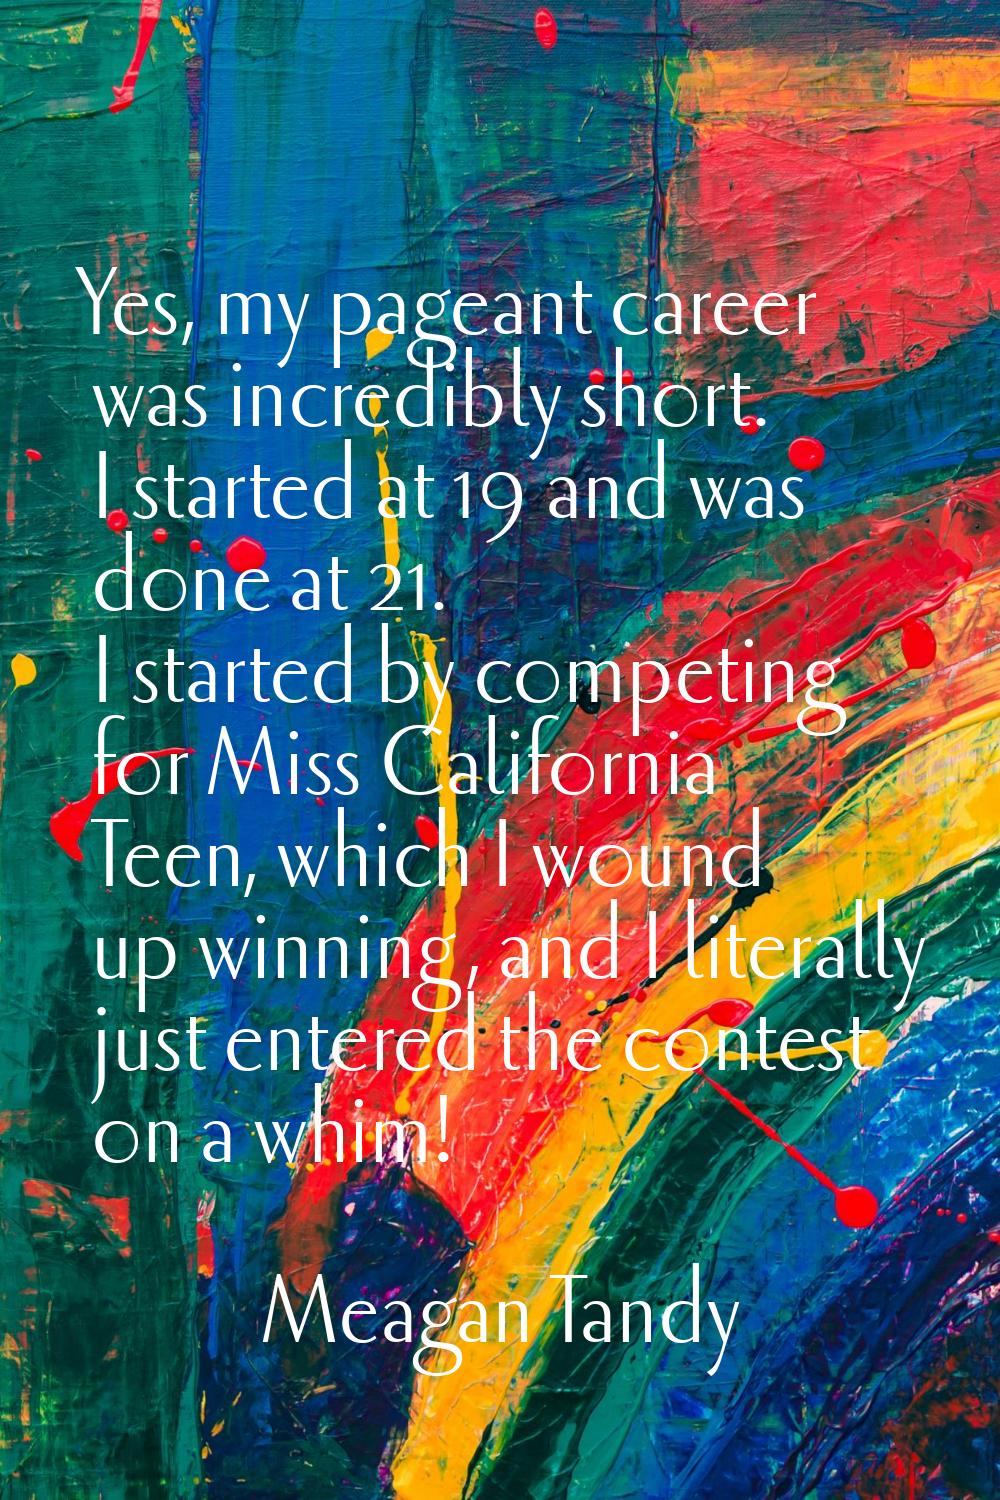 Yes, my pageant career was incredibly short. I started at 19 and was done at 21. I started by compe